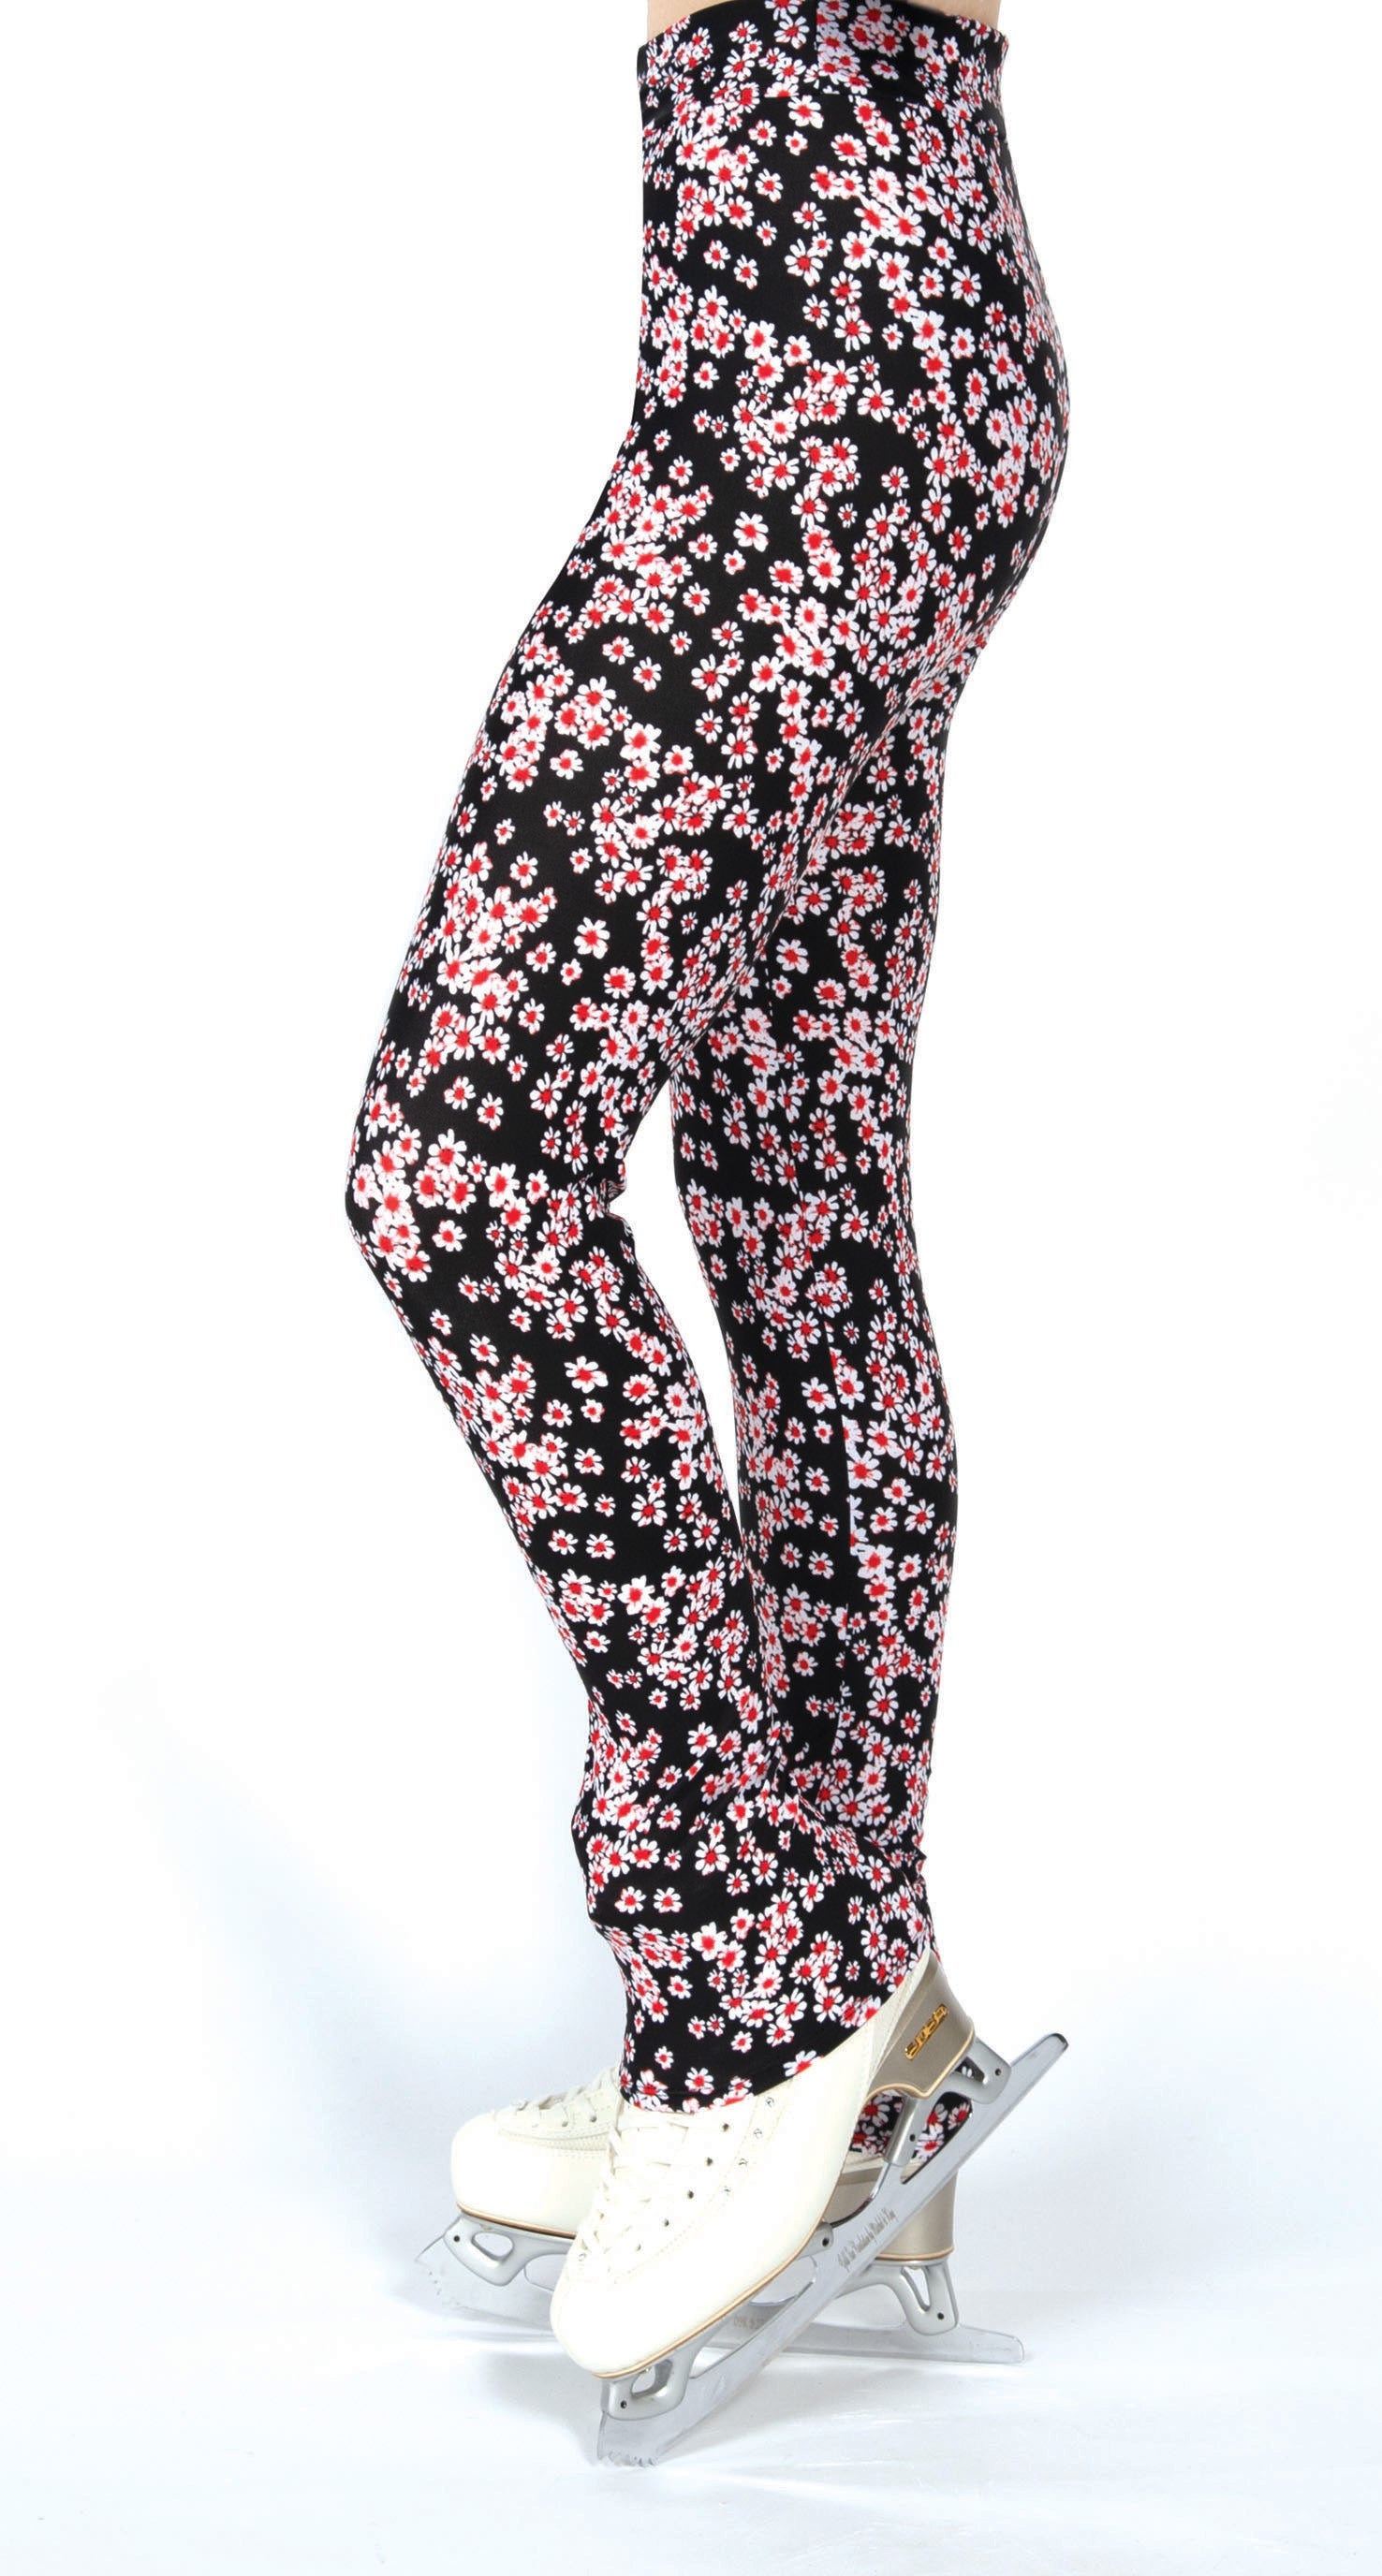 S114 Daisy Print Leggings by Jerry's